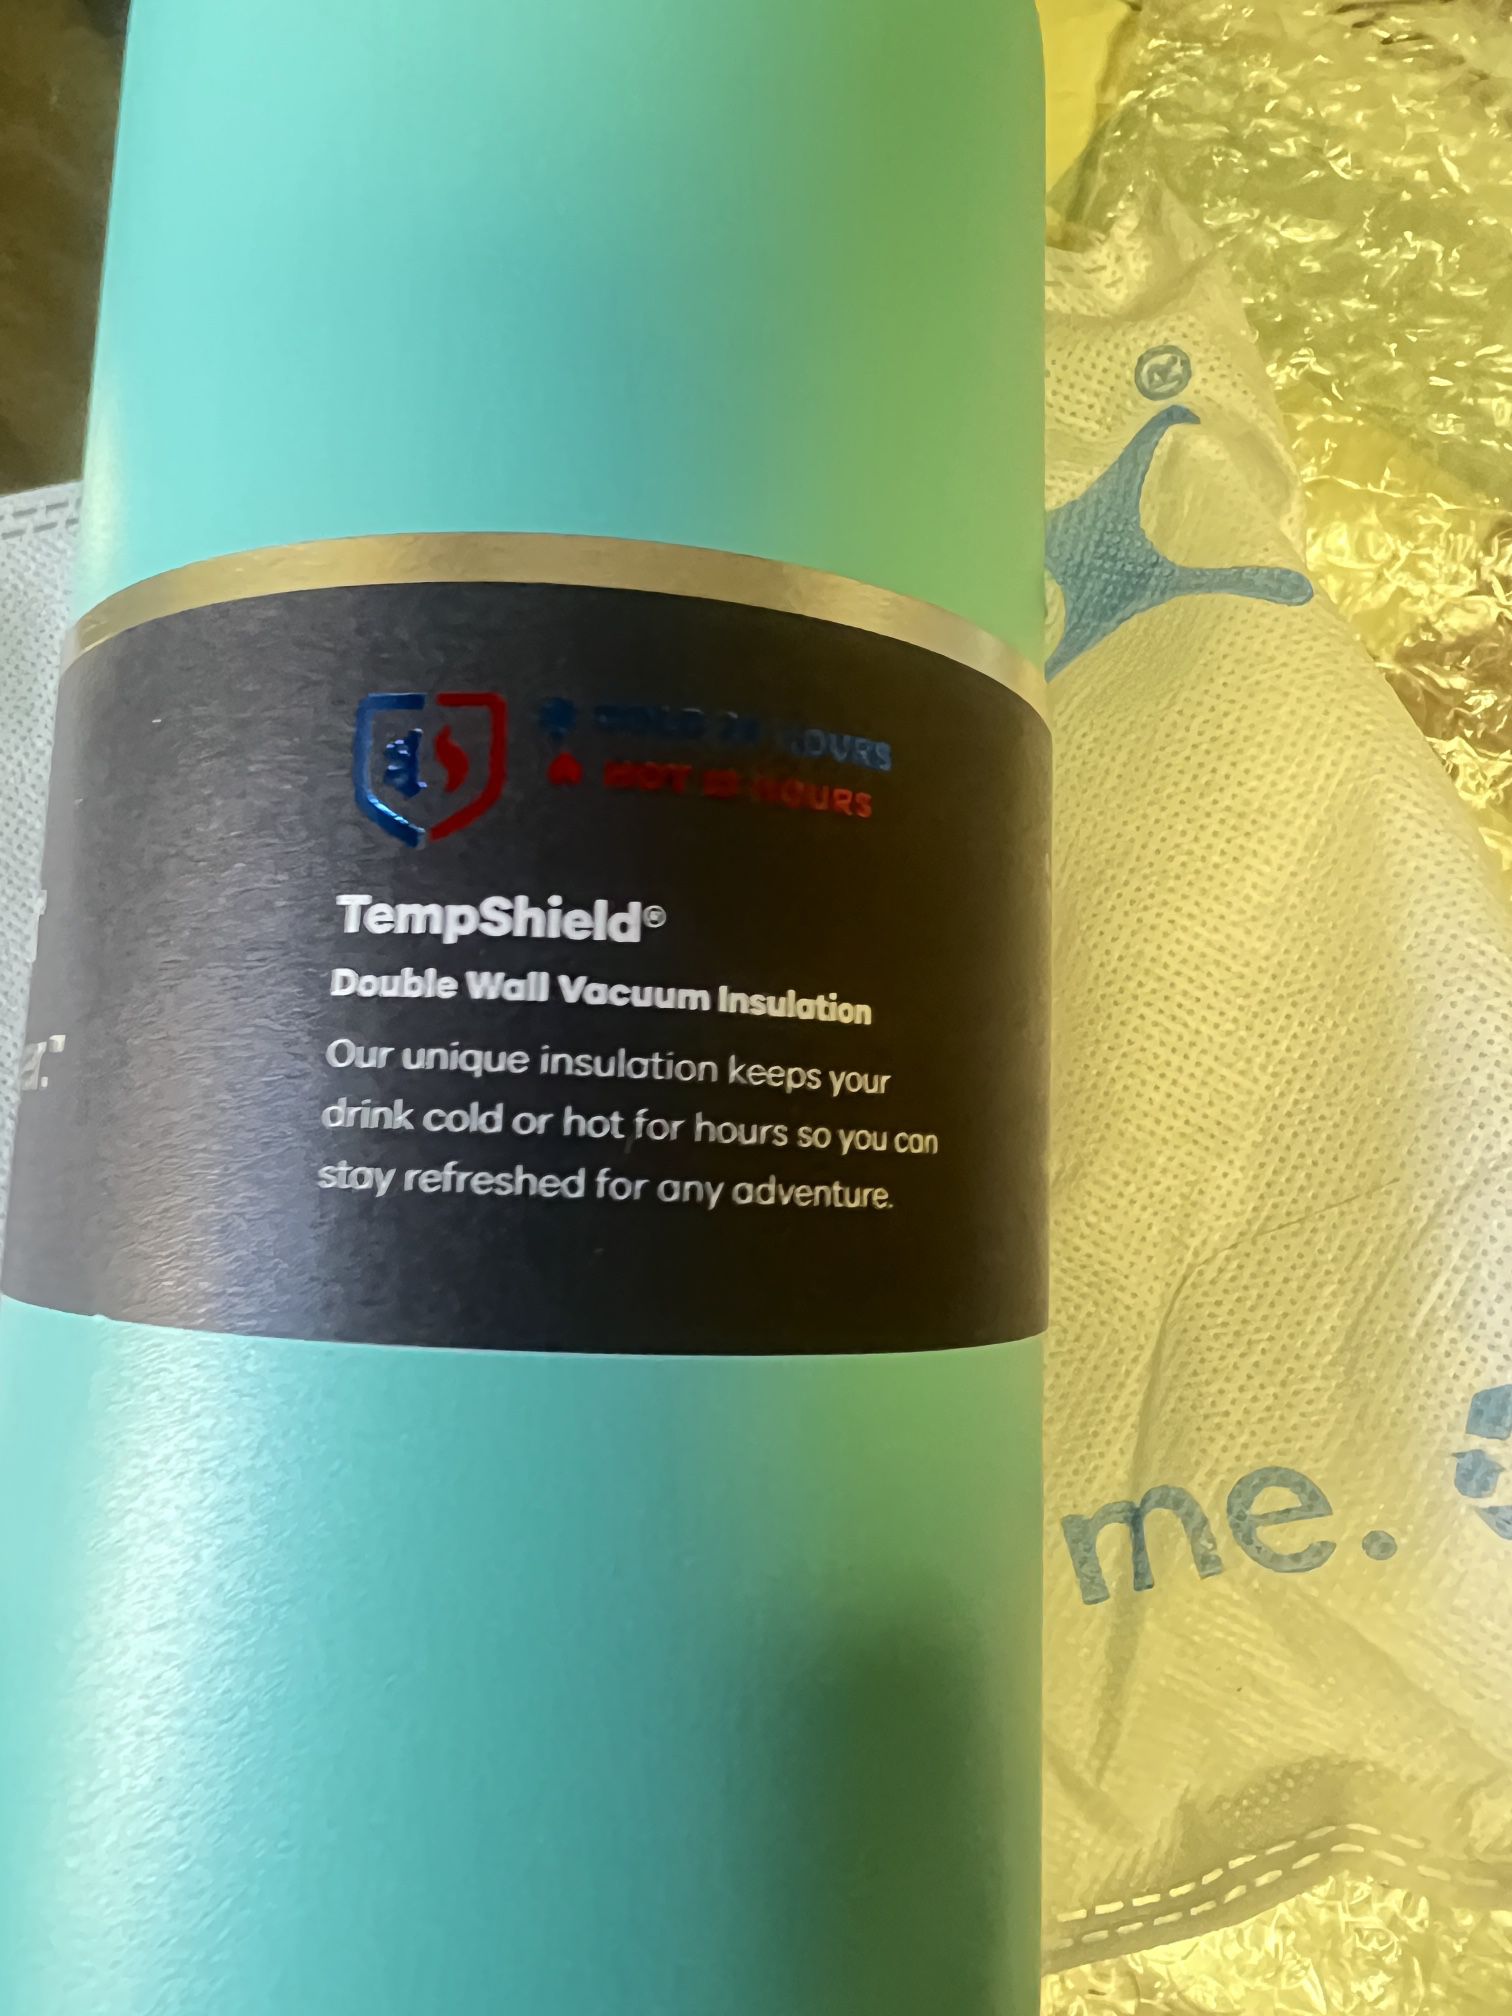 Hydro Flask 32oz for Sale in Long Beach, CA - OfferUp